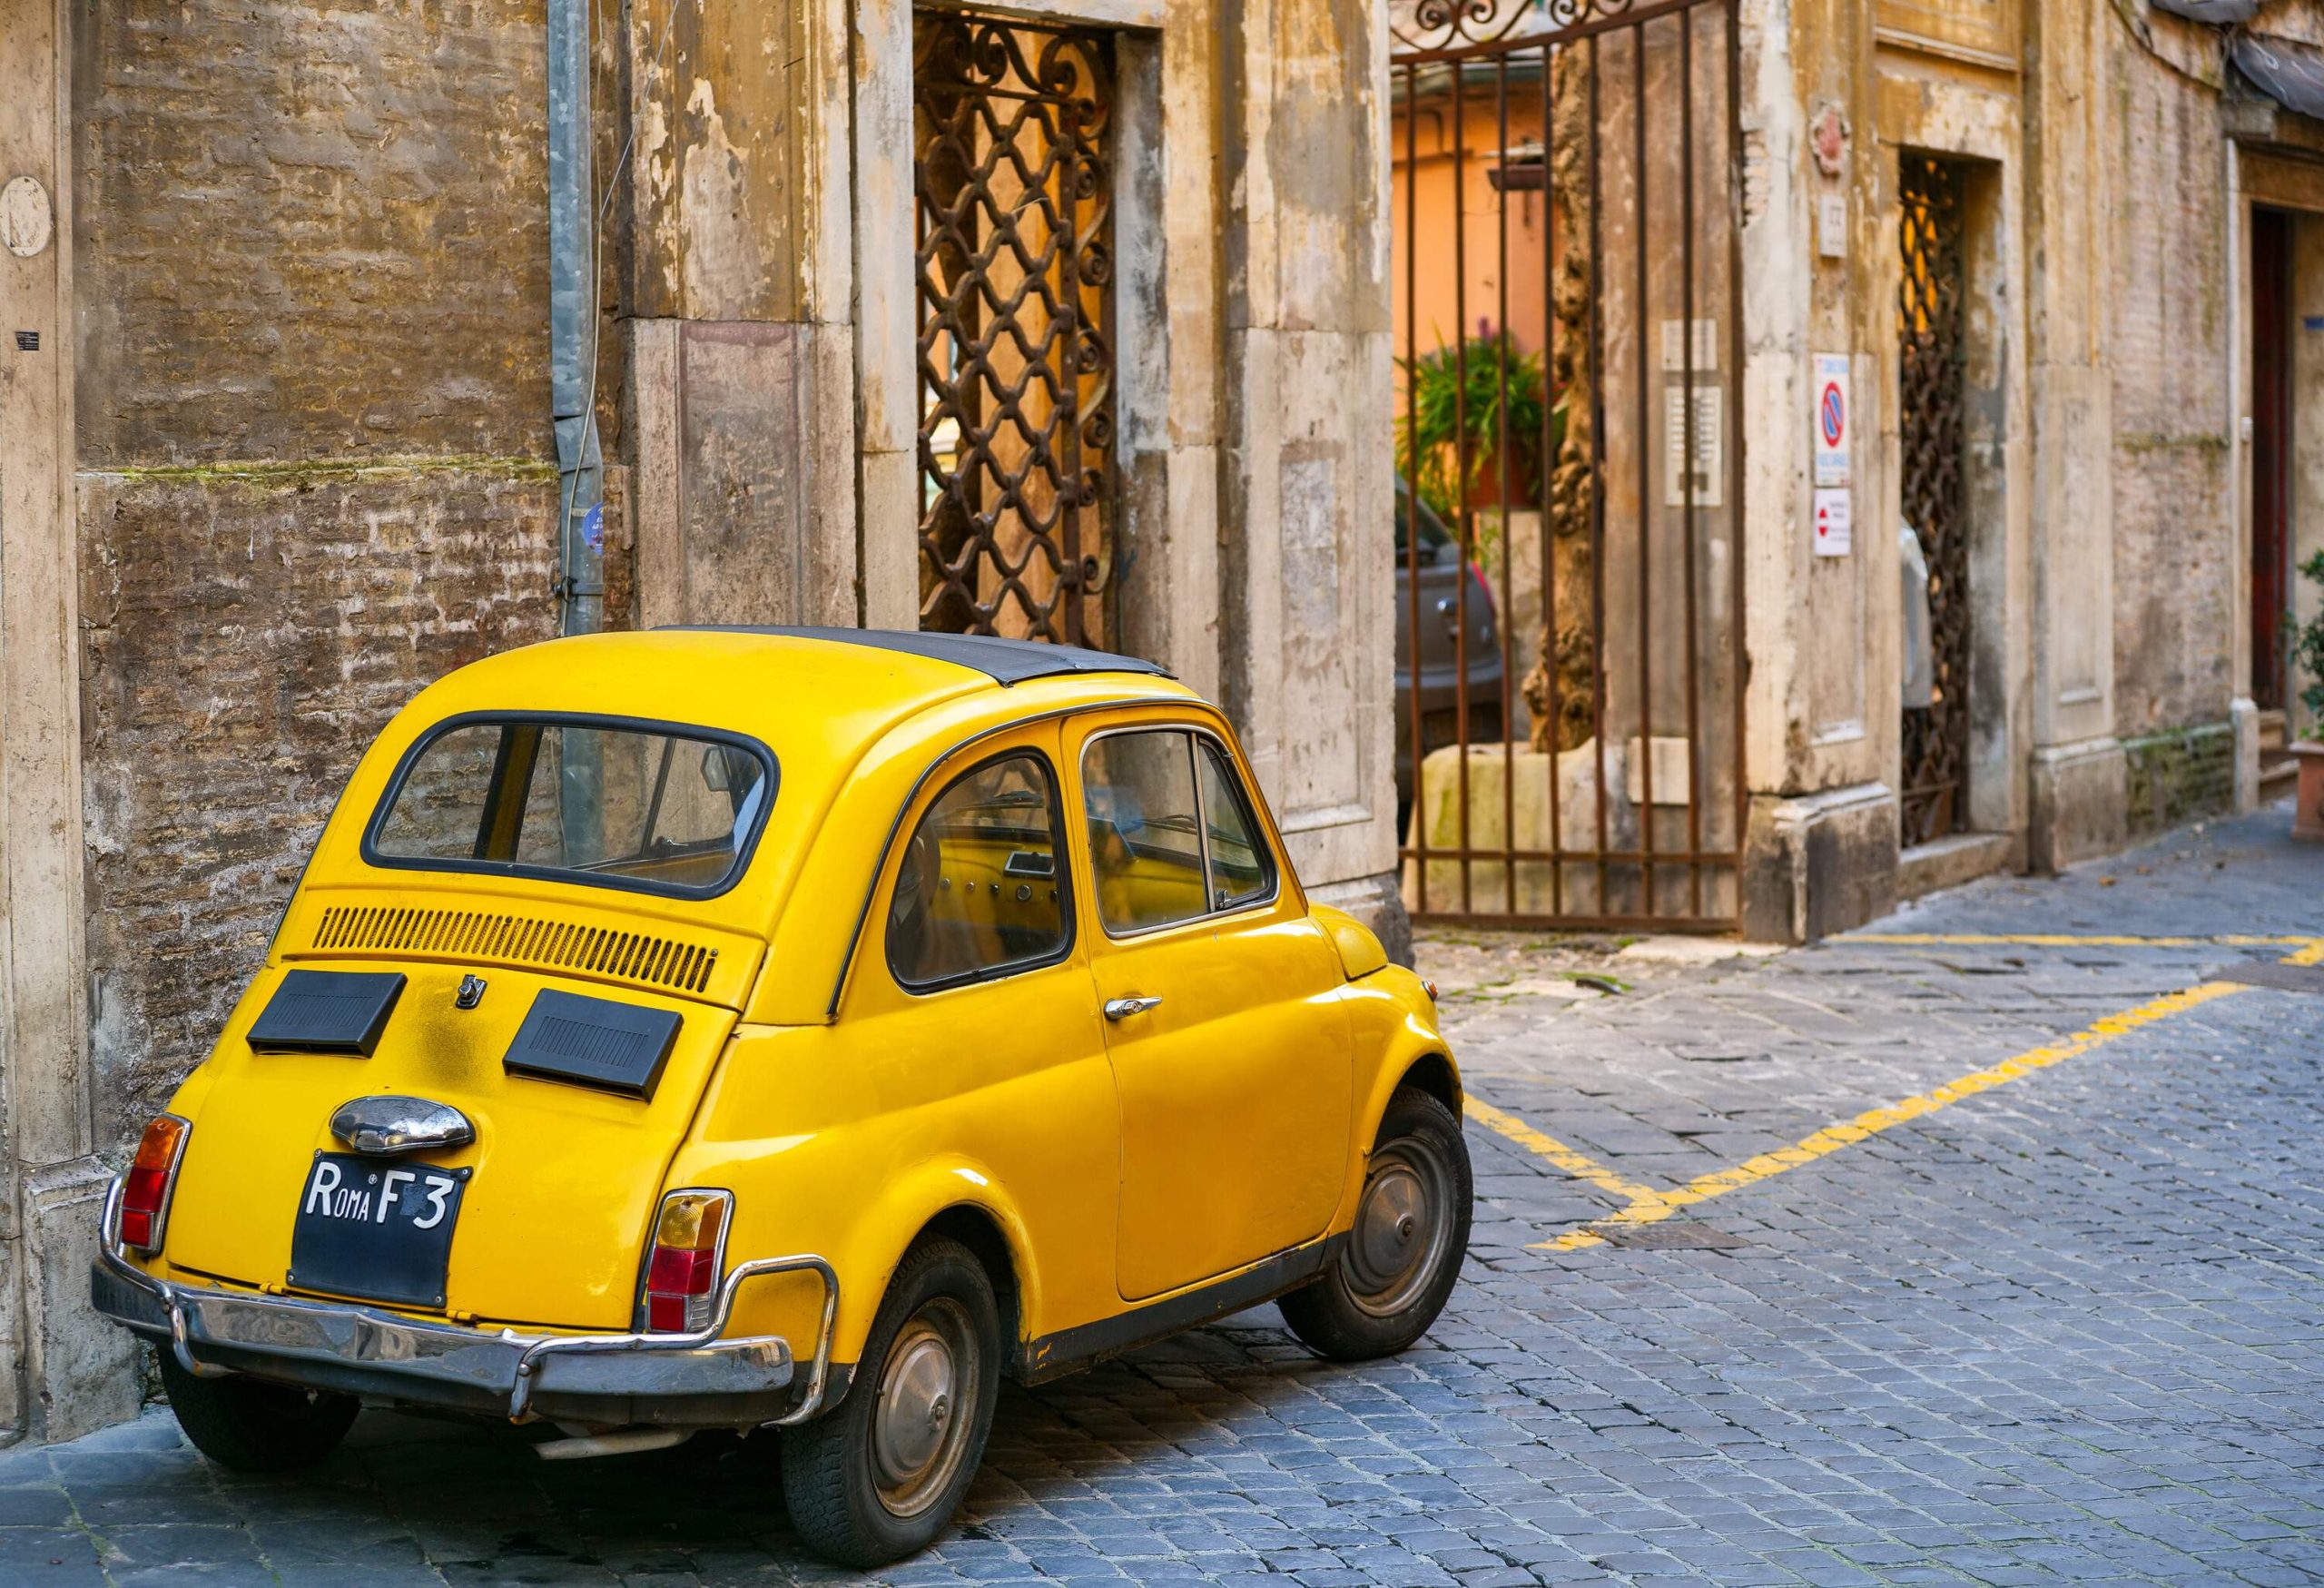 A yellow vintage car parked beside a gate along an alley.